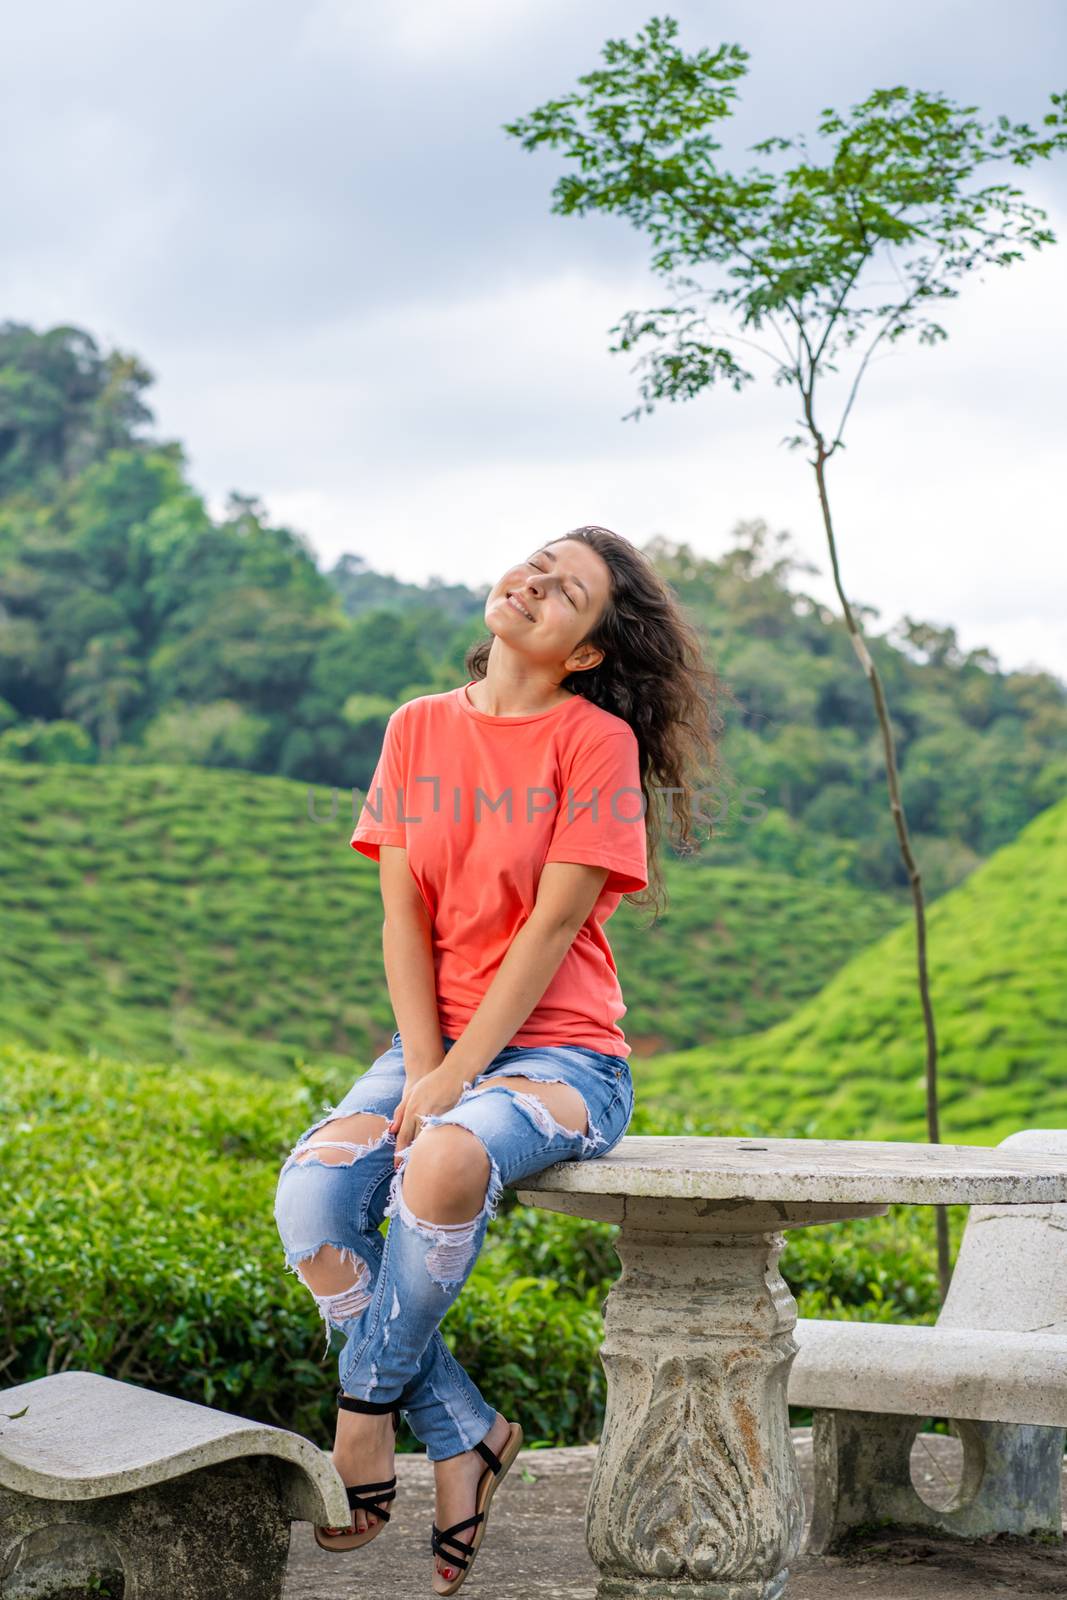 Beautiful brunette girl posing in the middle of the tea valley between green tea bushes